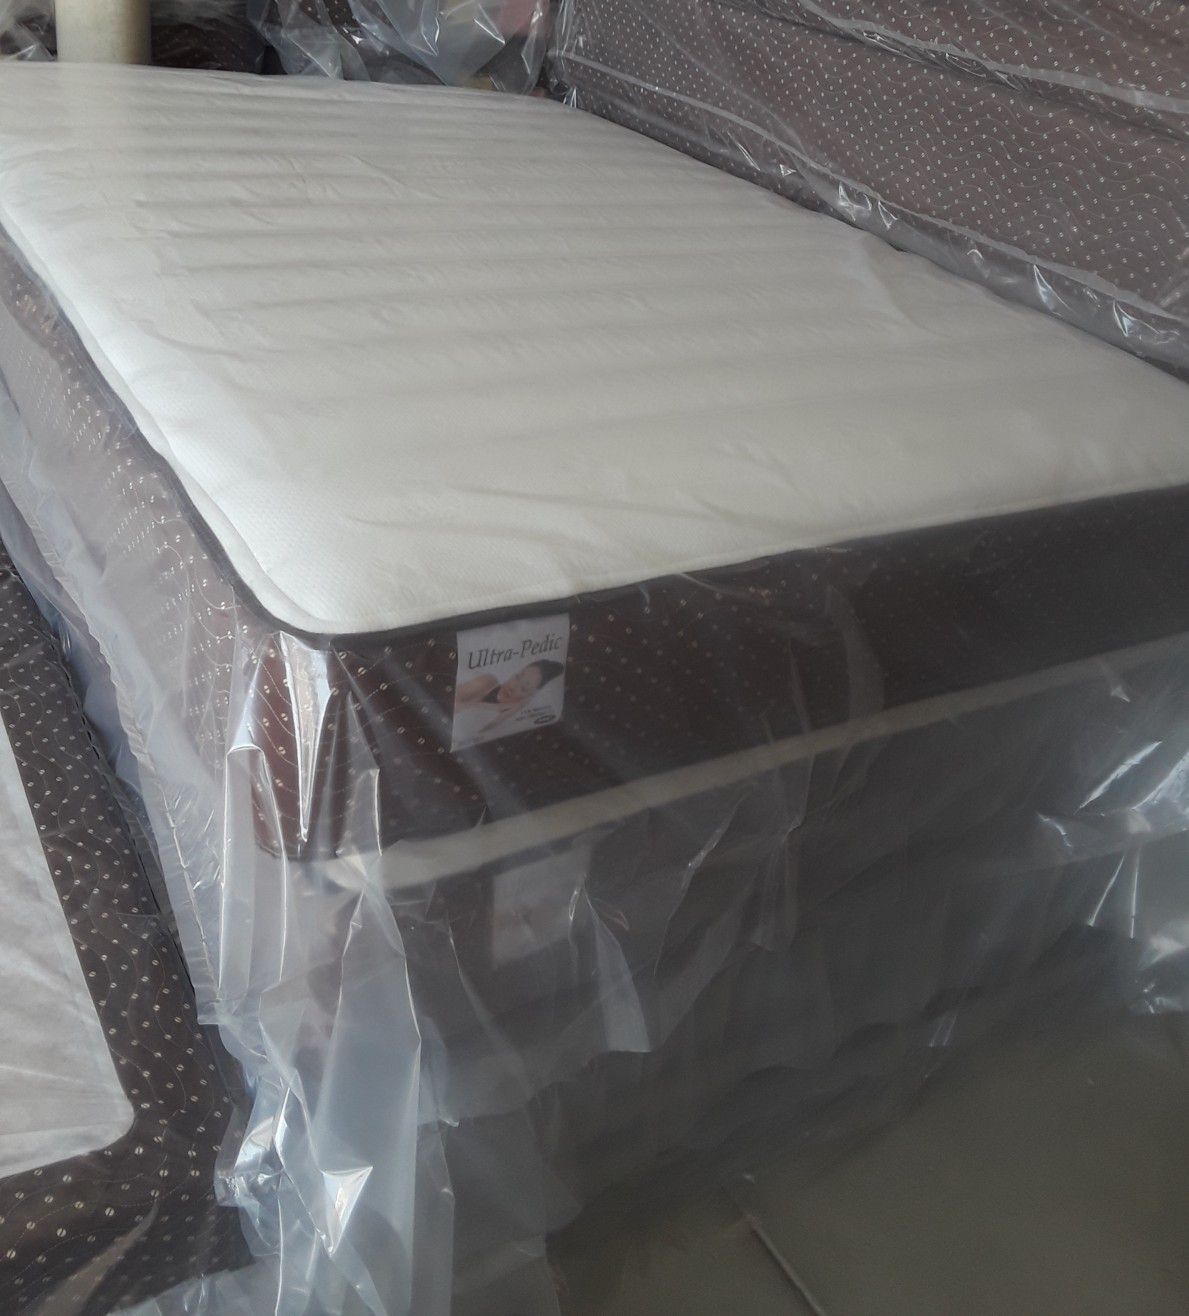 I have a full sz pillow top Mattress, very soft,has a factory warranty, new in plastic, from the factory.$185.00.